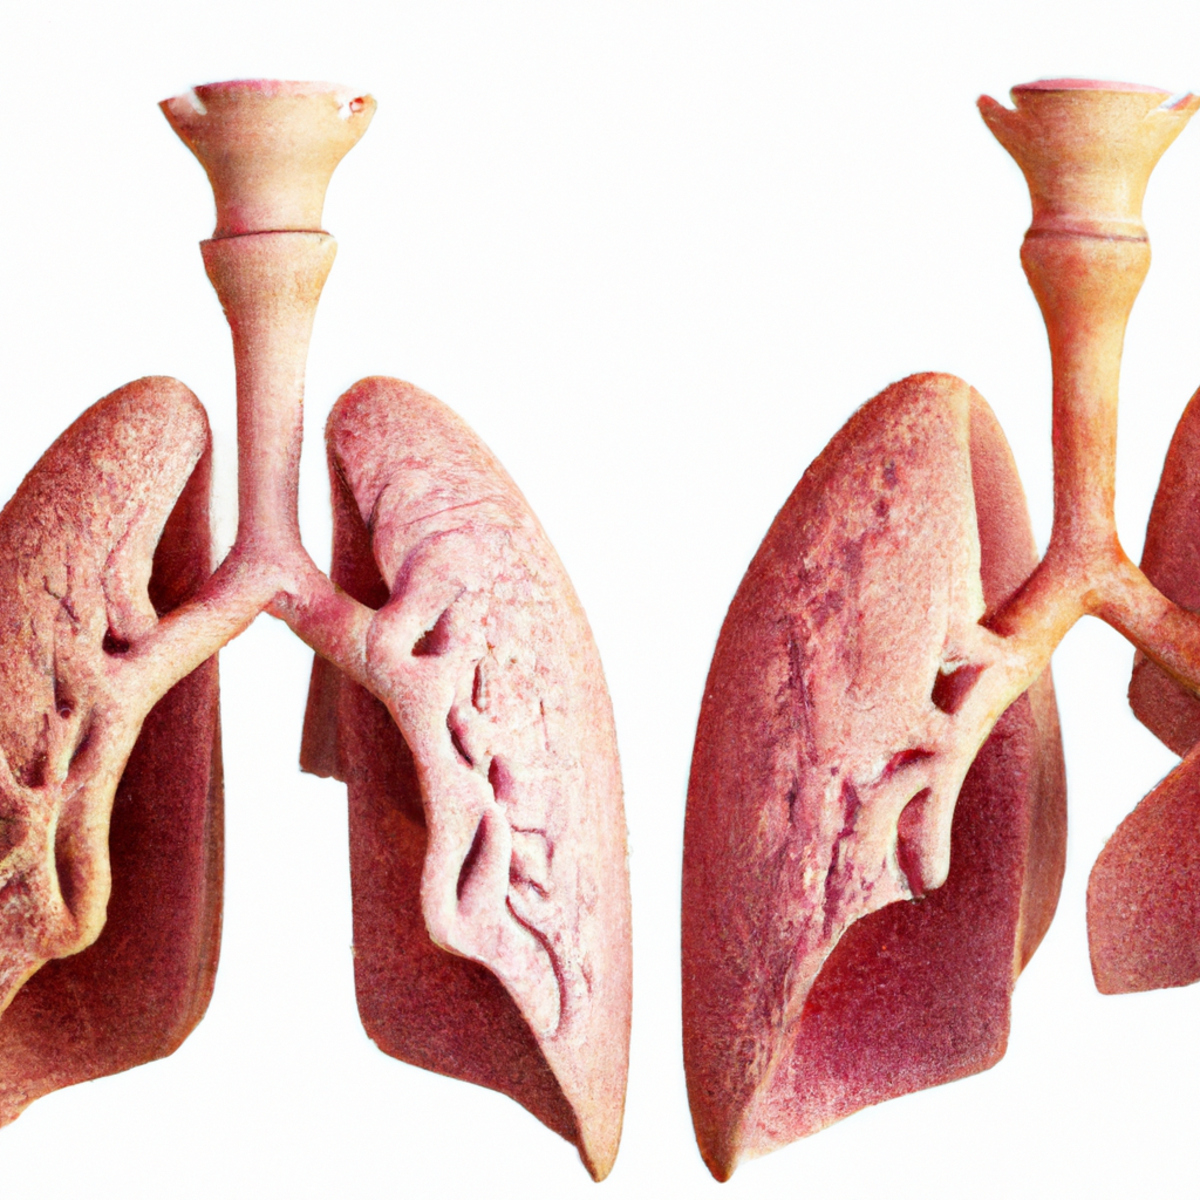 Comparison of healthy lungs and lungs with Primary Ciliary Dyskinesia.